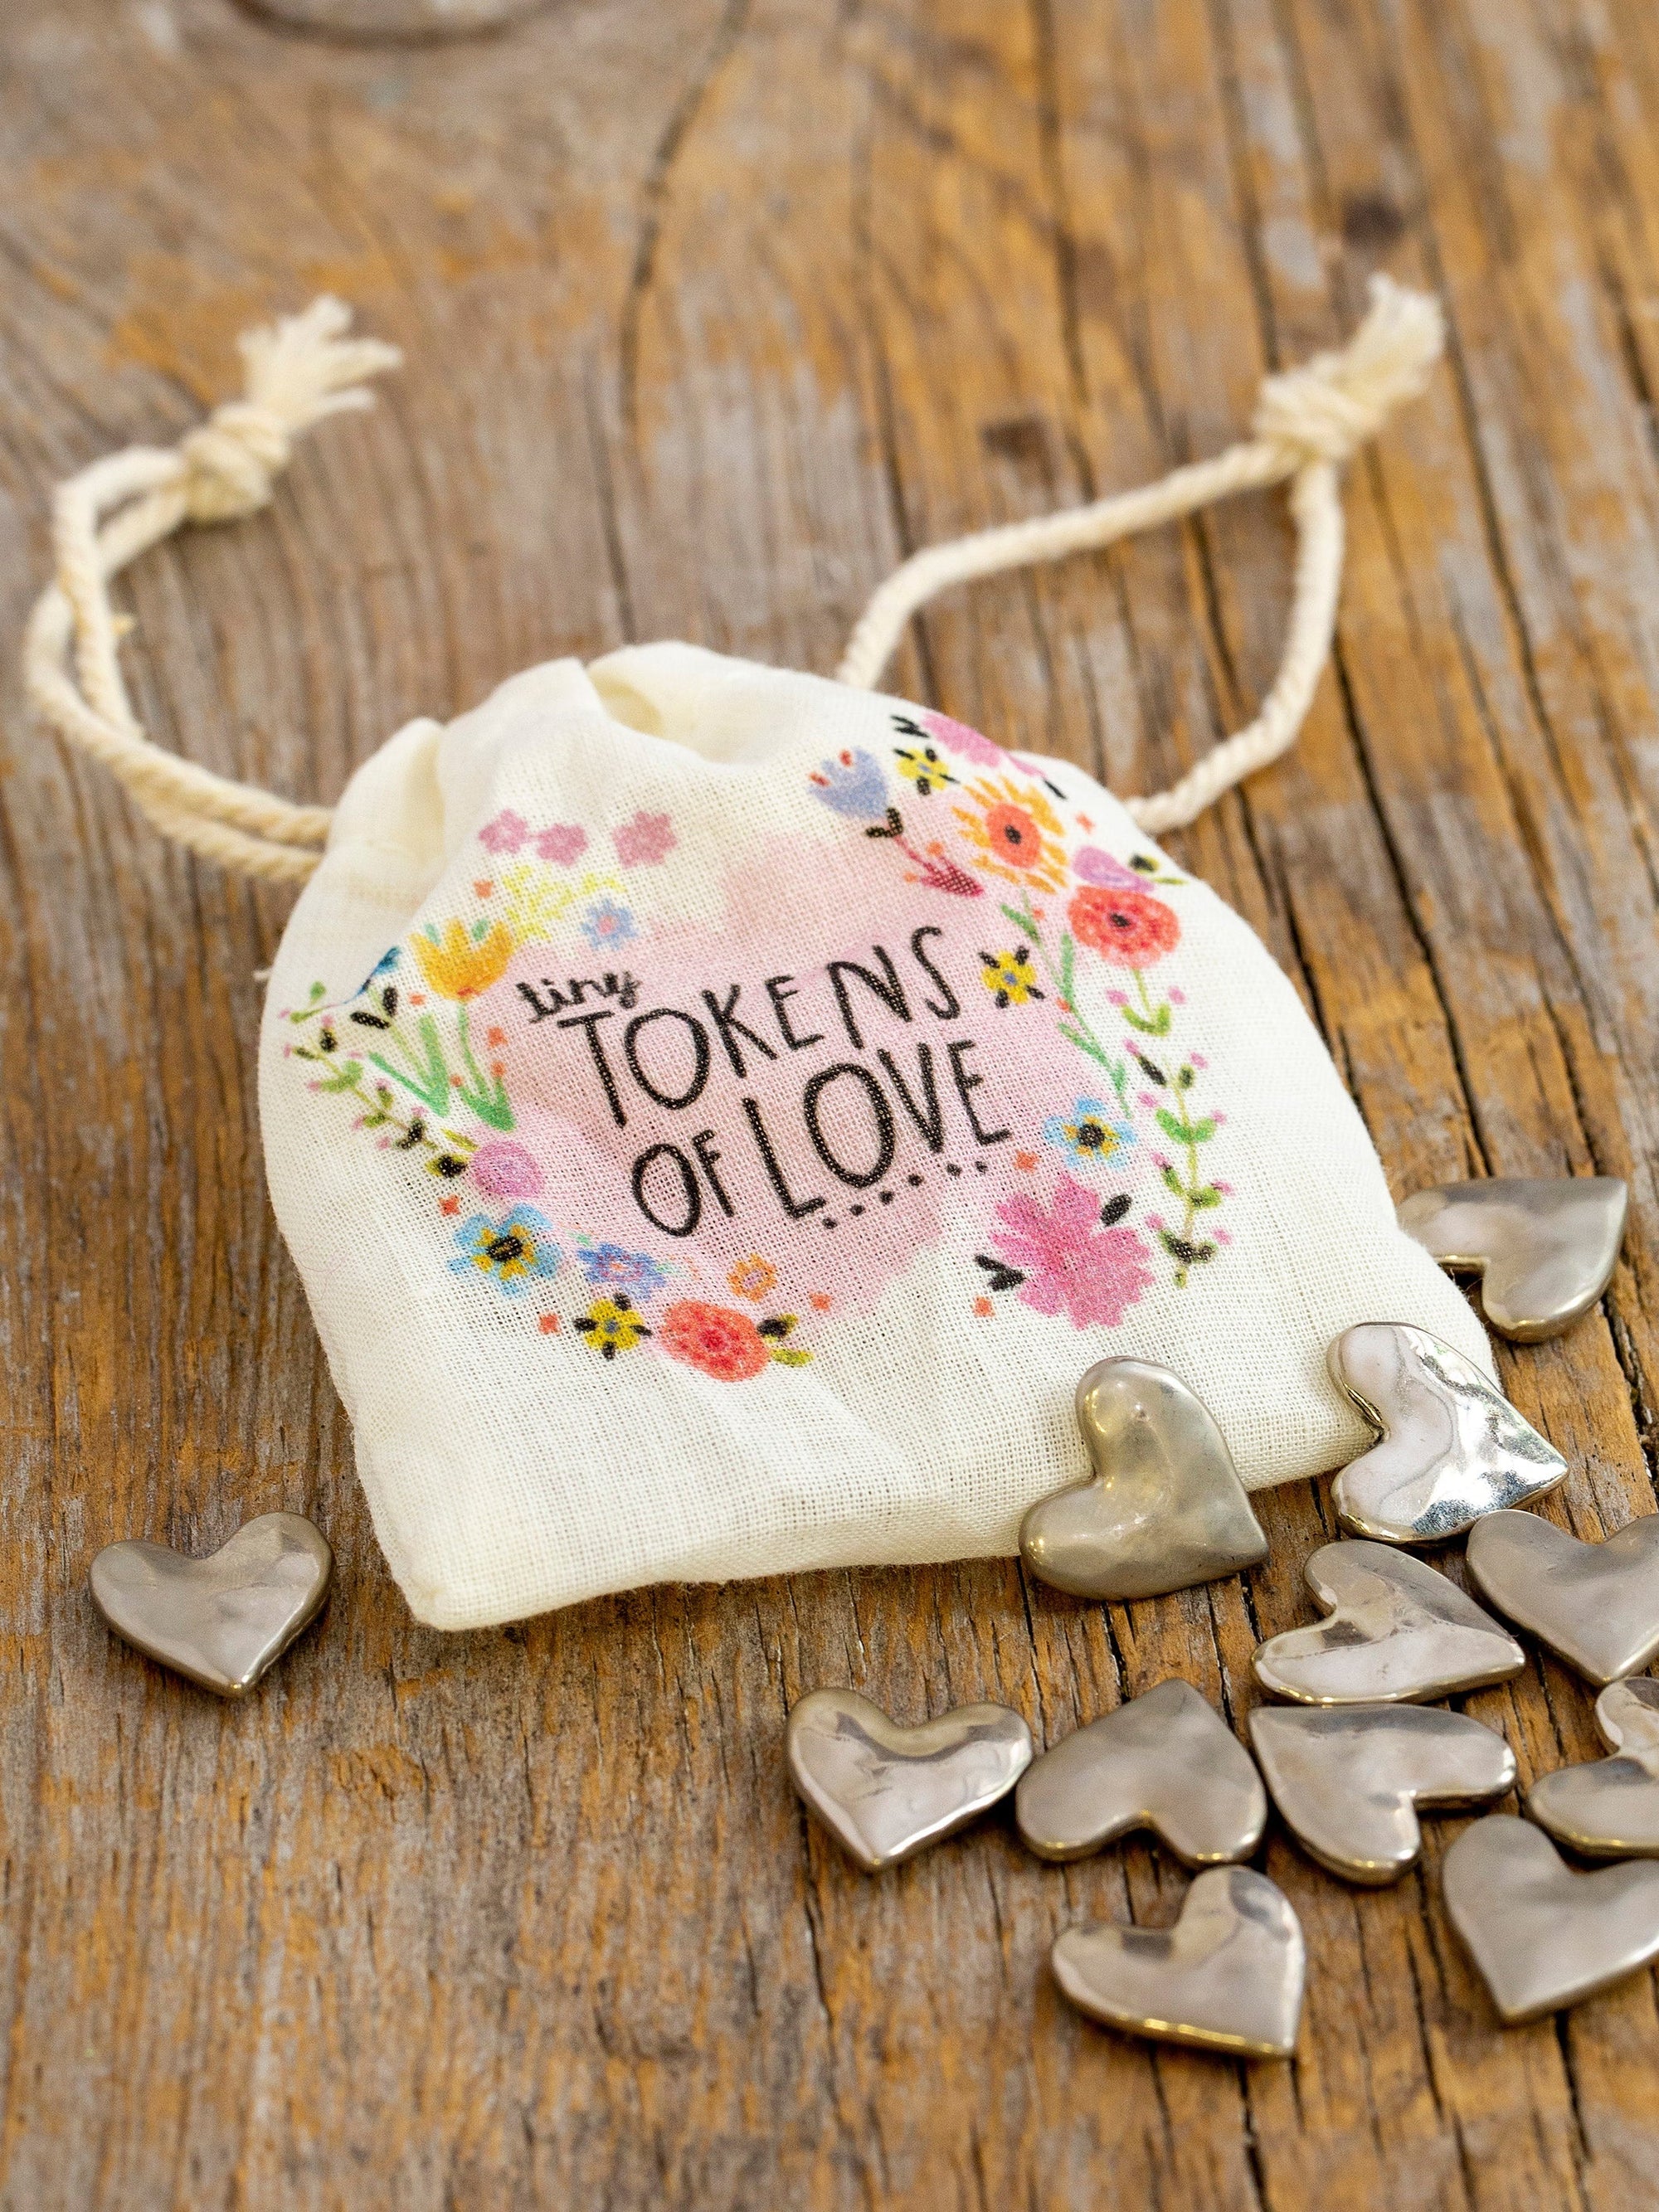 Tokens of Love